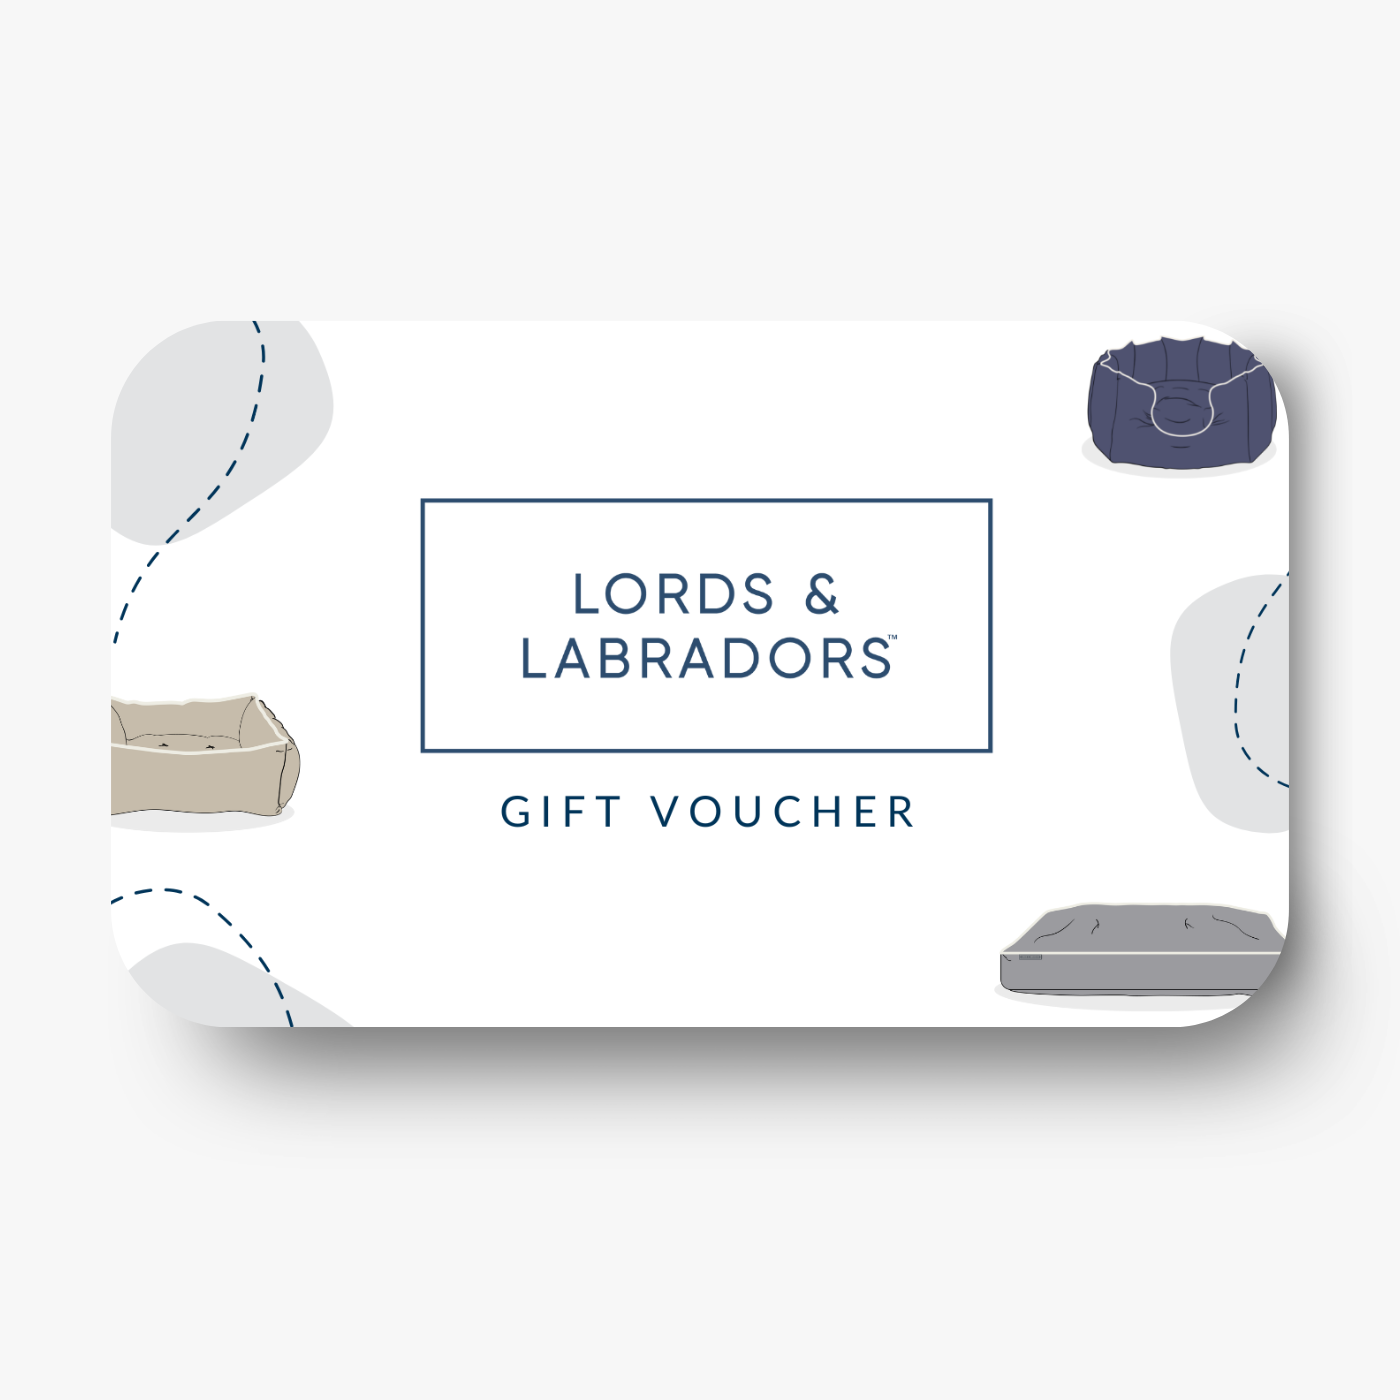 Lords & Labradors Gift Voucher